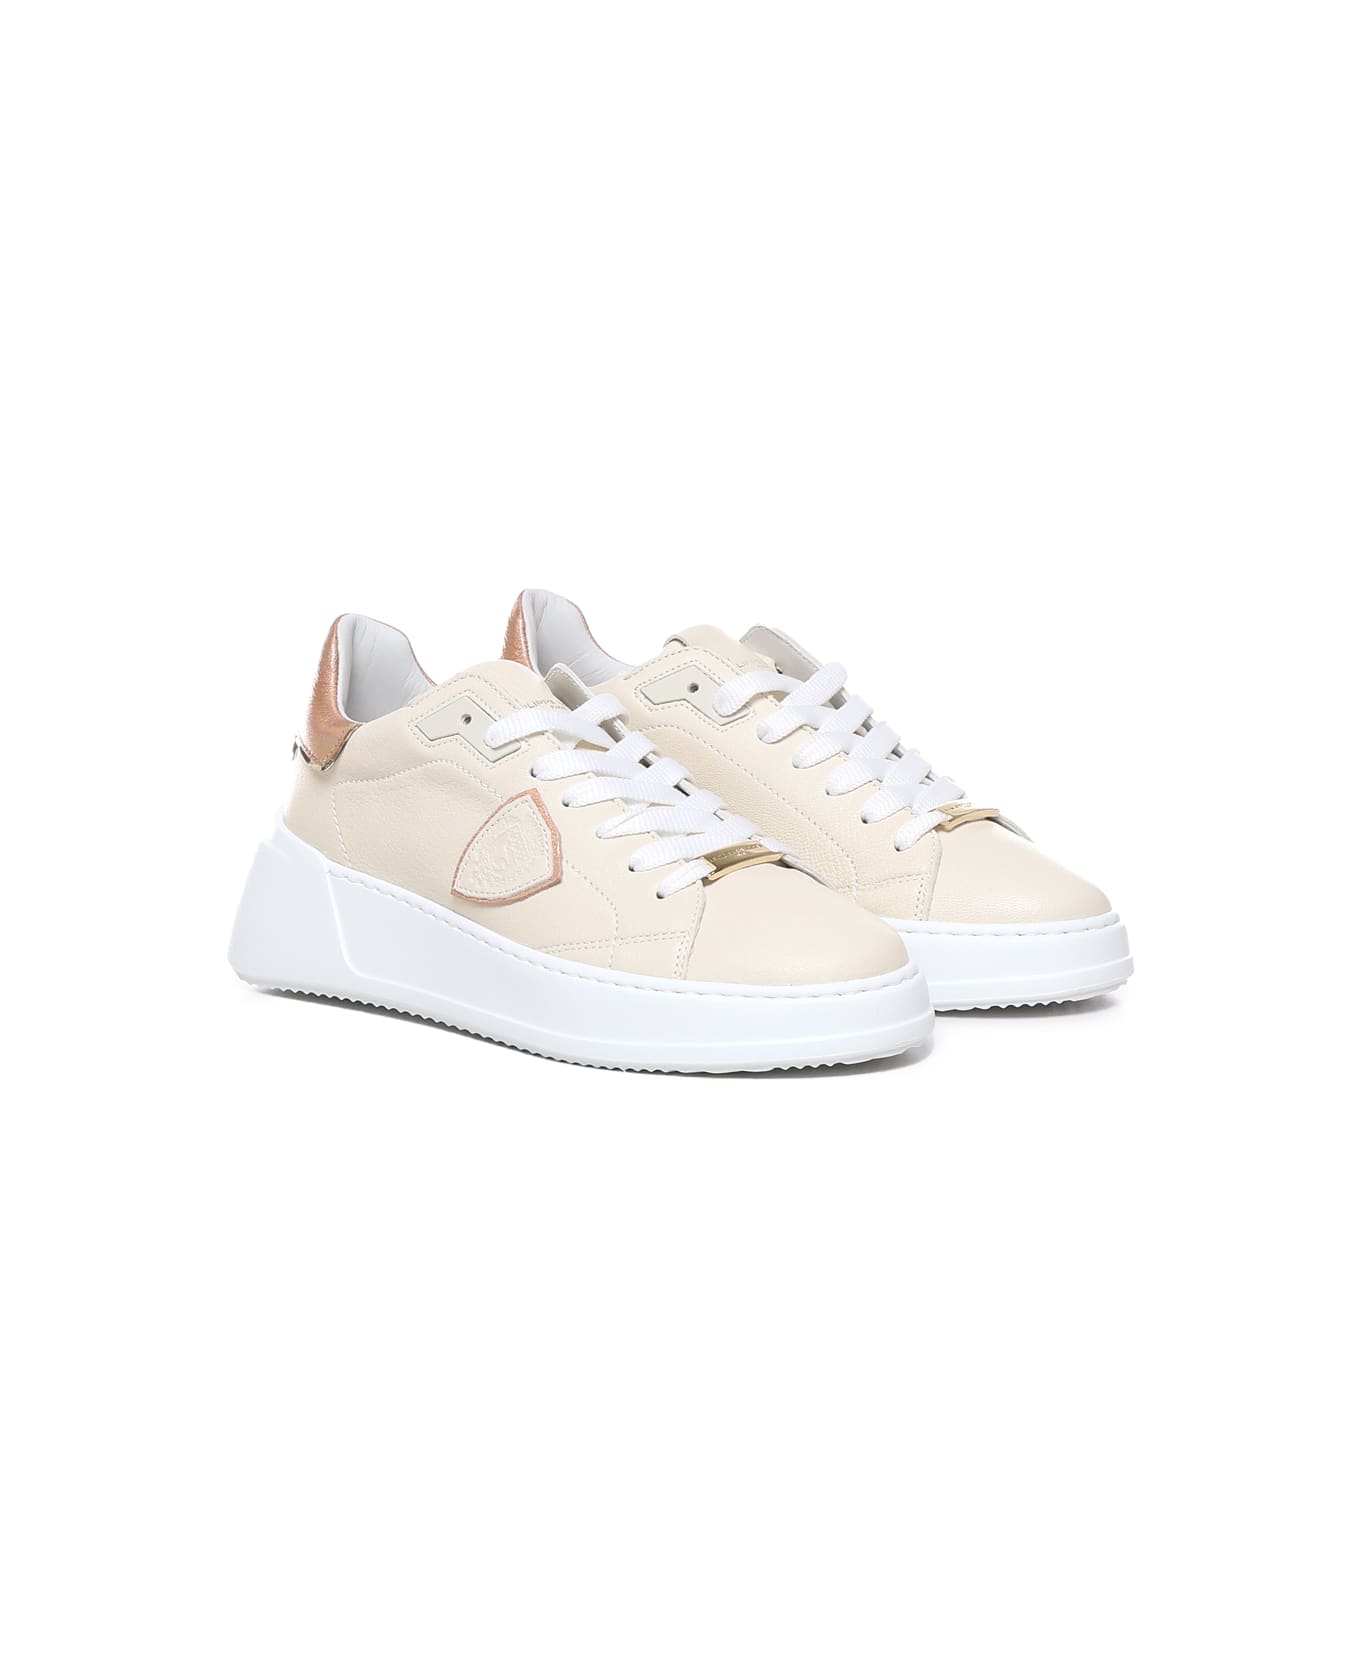 Philippe Model Tres Temple Sneakers - Peach スニーカー